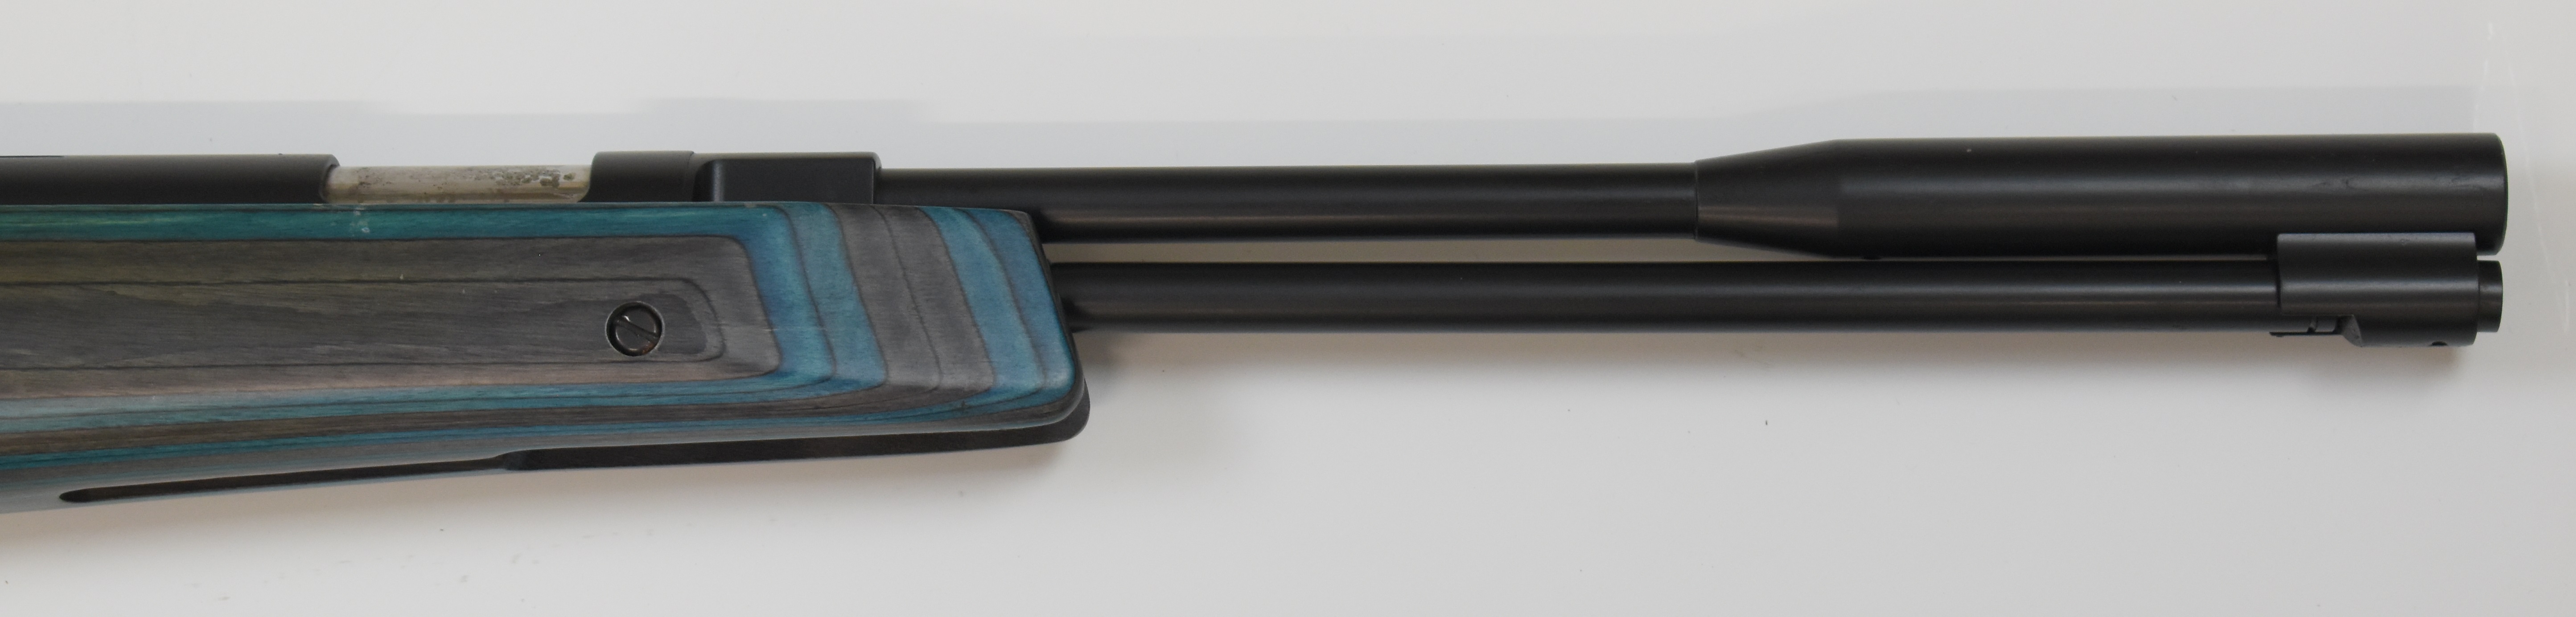 Weihrauch HW97K .177 underlever air rifle with blue laminated show wood stock, semi-pistol grip, - Image 6 of 10